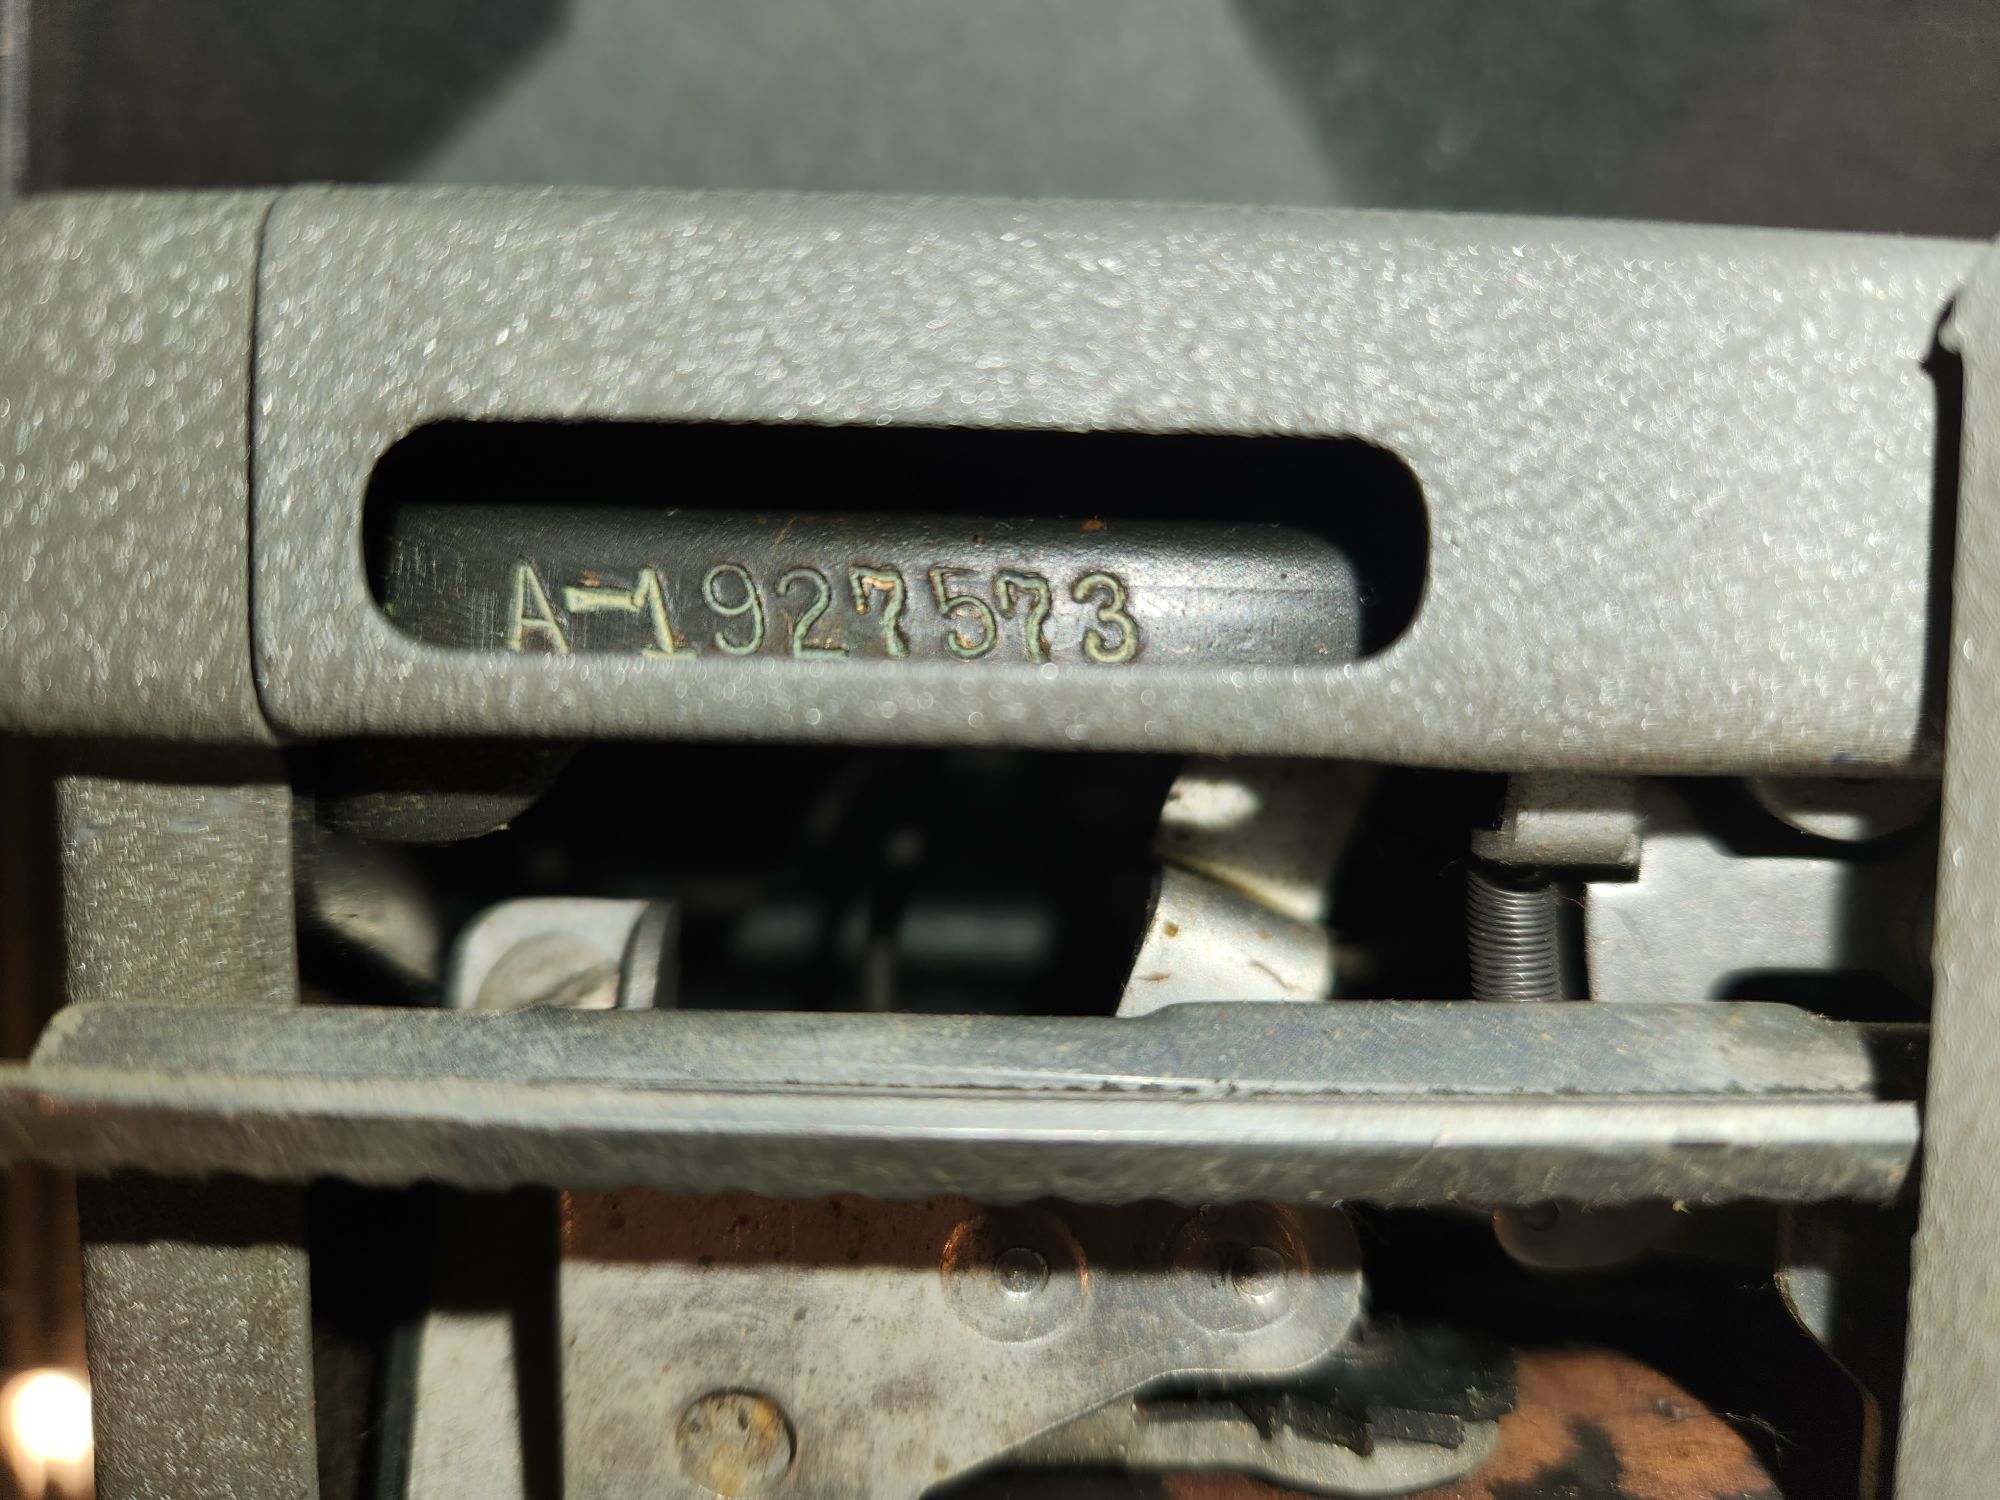 Serial number A-1927573 stamped into black metal recessed into the gray frame of the typewriter.